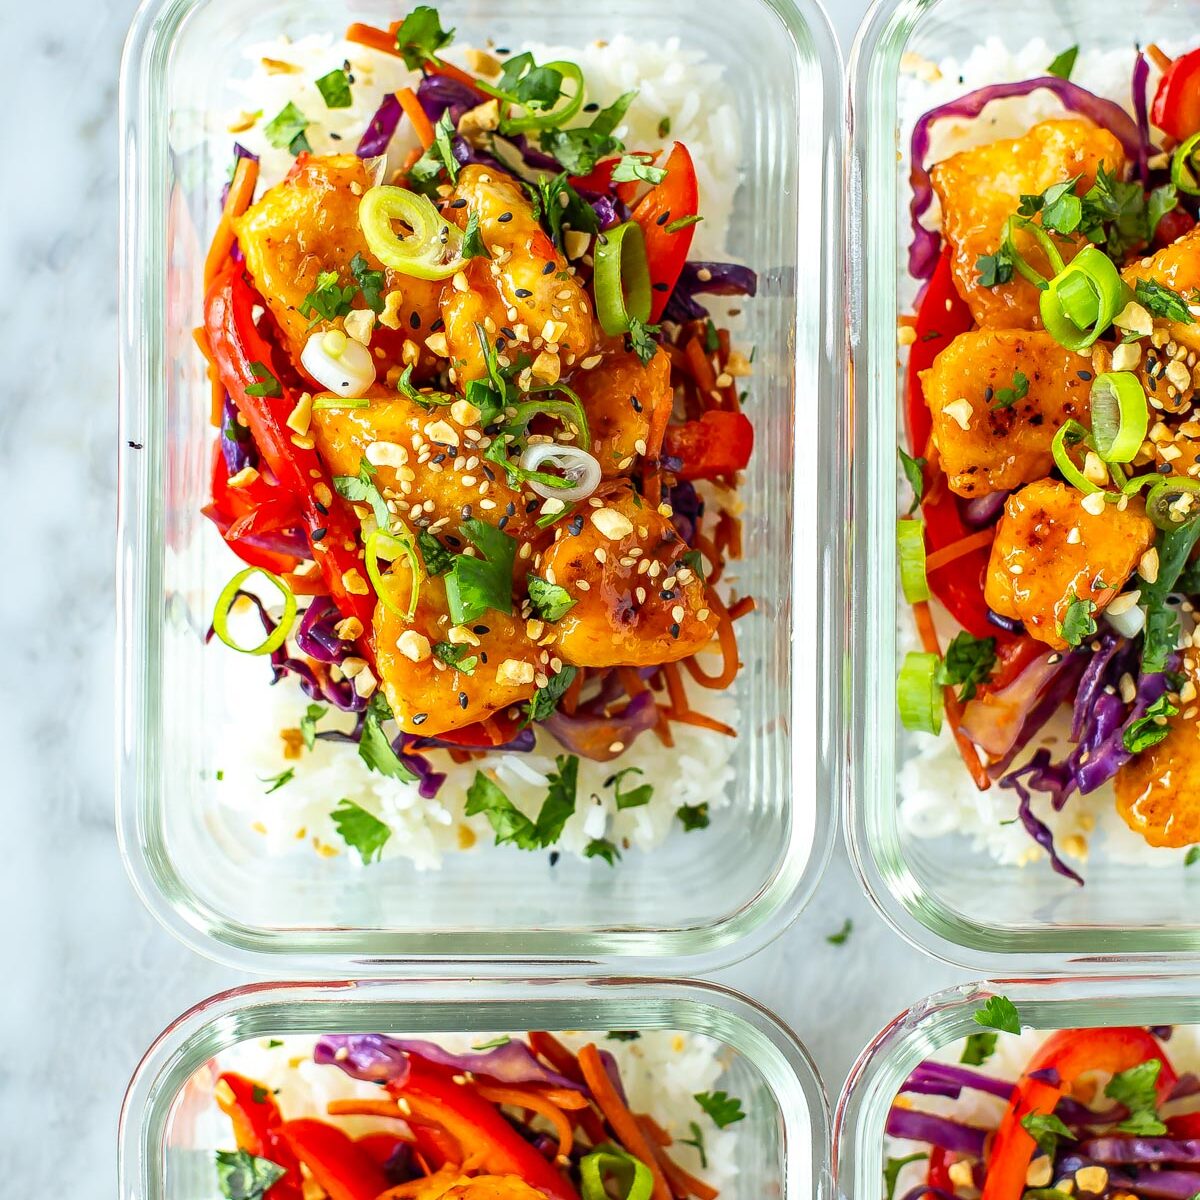 Four meal prep containers with sweet chili chicken inside.